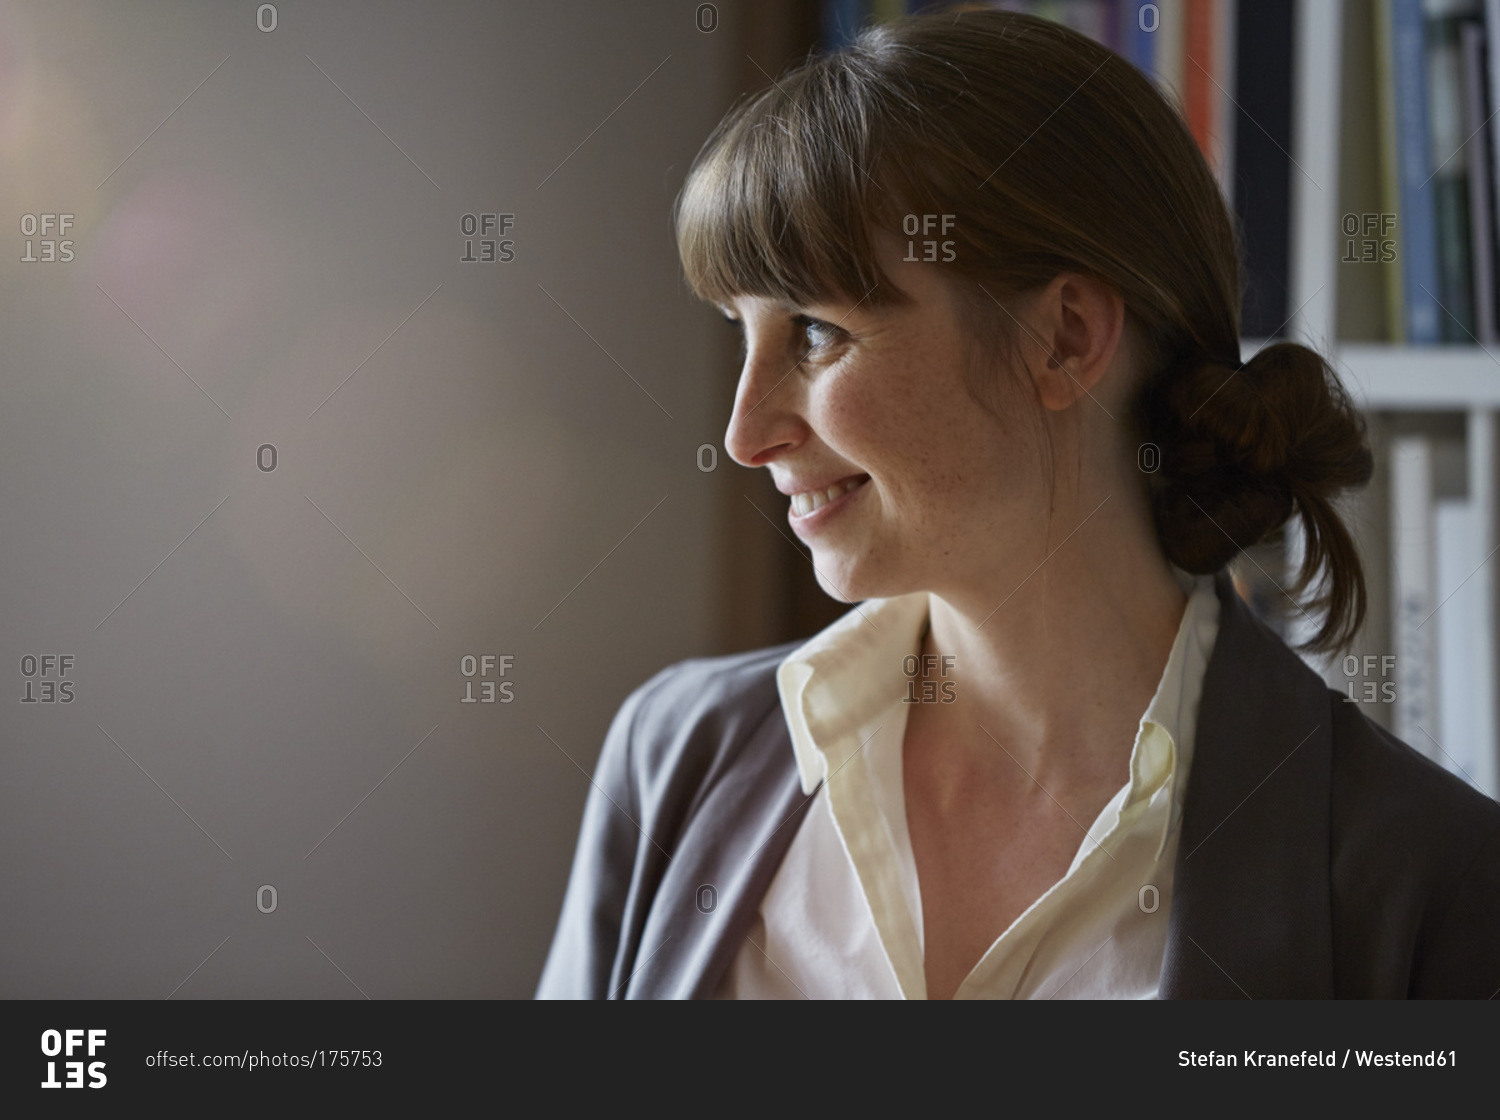 Smiling woman in front of book shelf